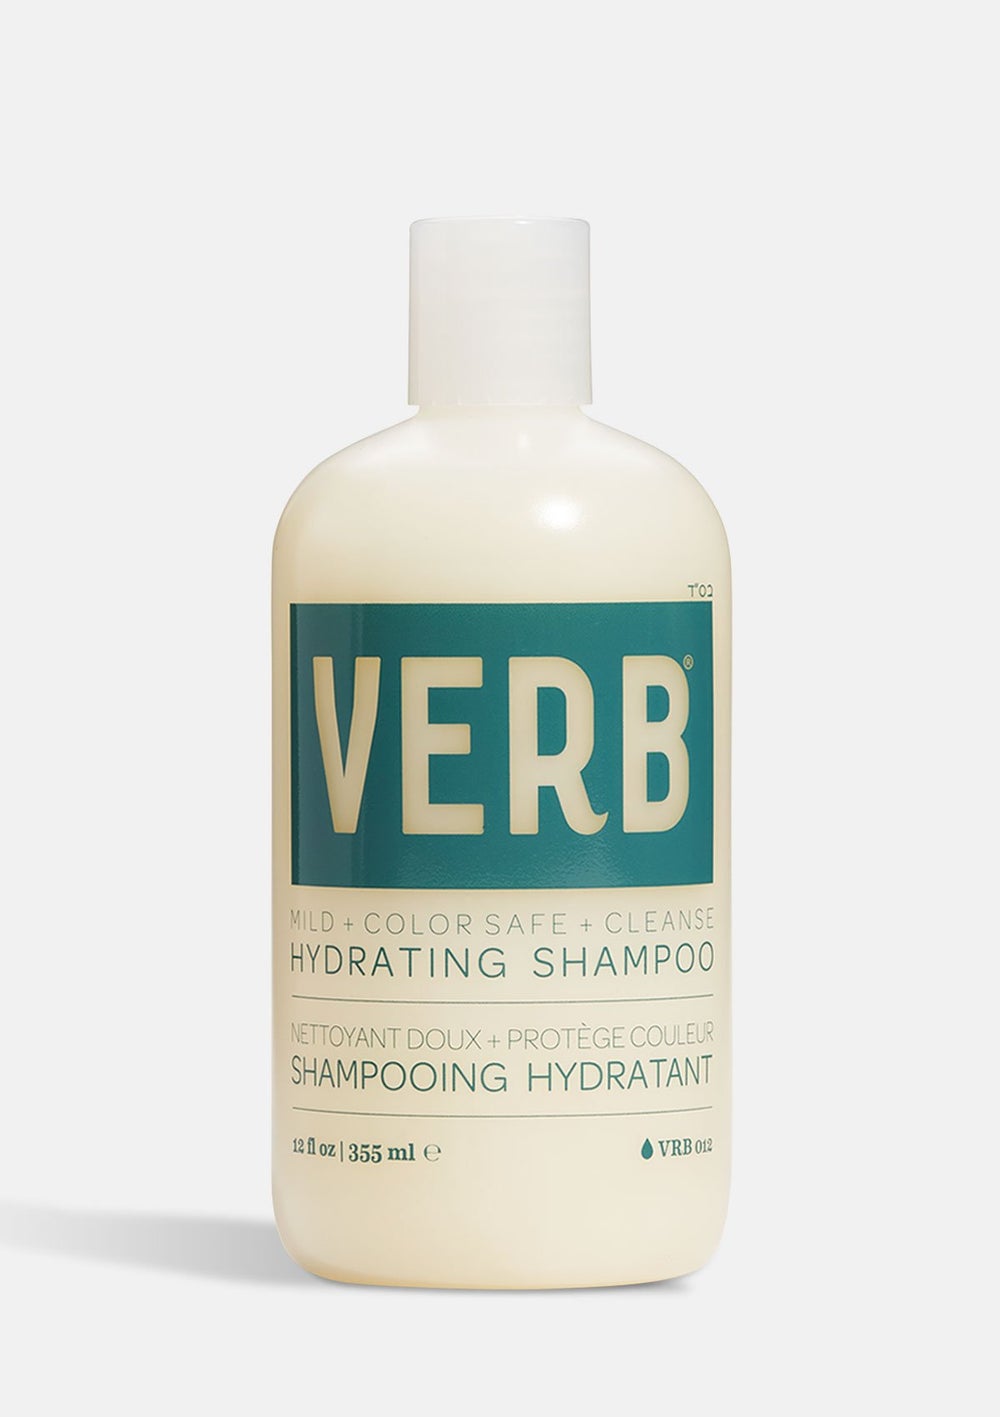 Verb - Hydrating Shampoo Mild + Color Safe + Cleanse |12 oz| - by Verb |ProCare Outlet|